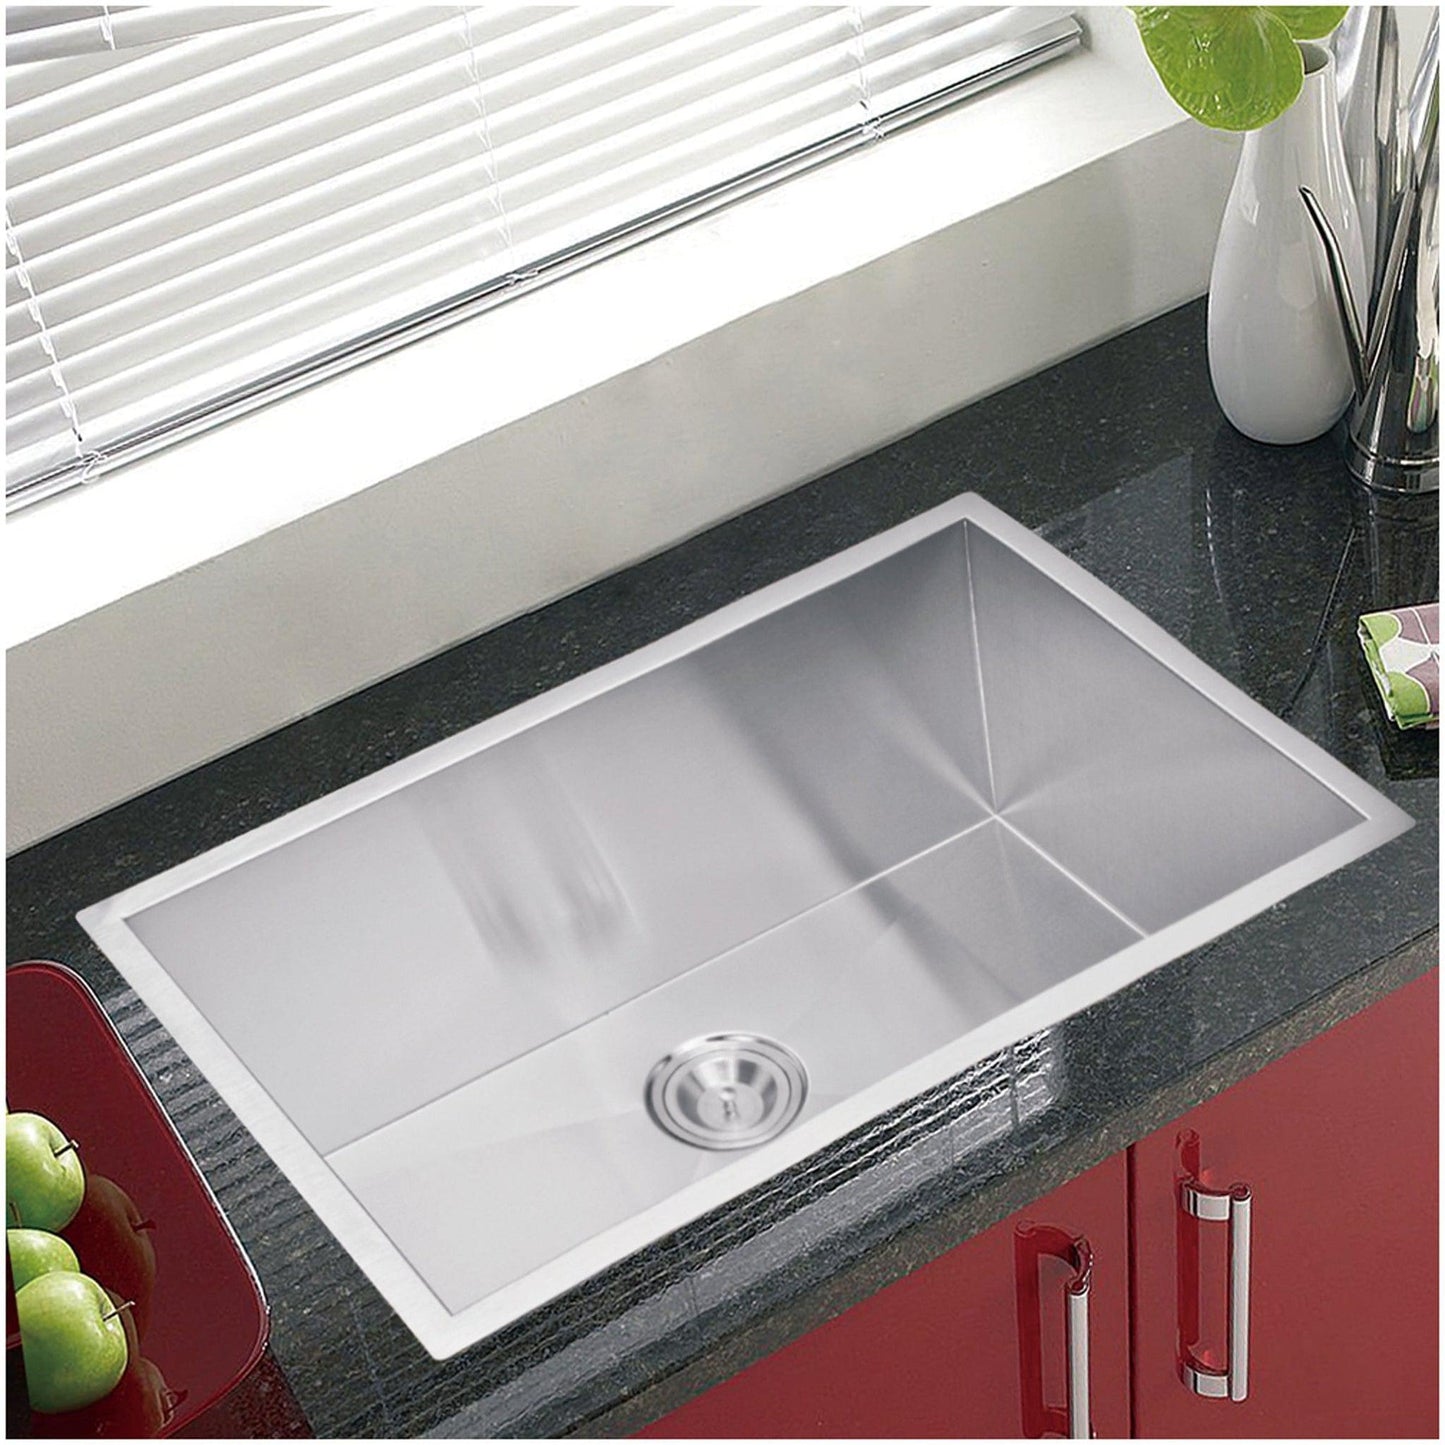 Water Creation Zero Radius Single Bowl Stainless Steel Hand Made Undermount 30 Inch X 19 Inch Sink With Drain And Strainer